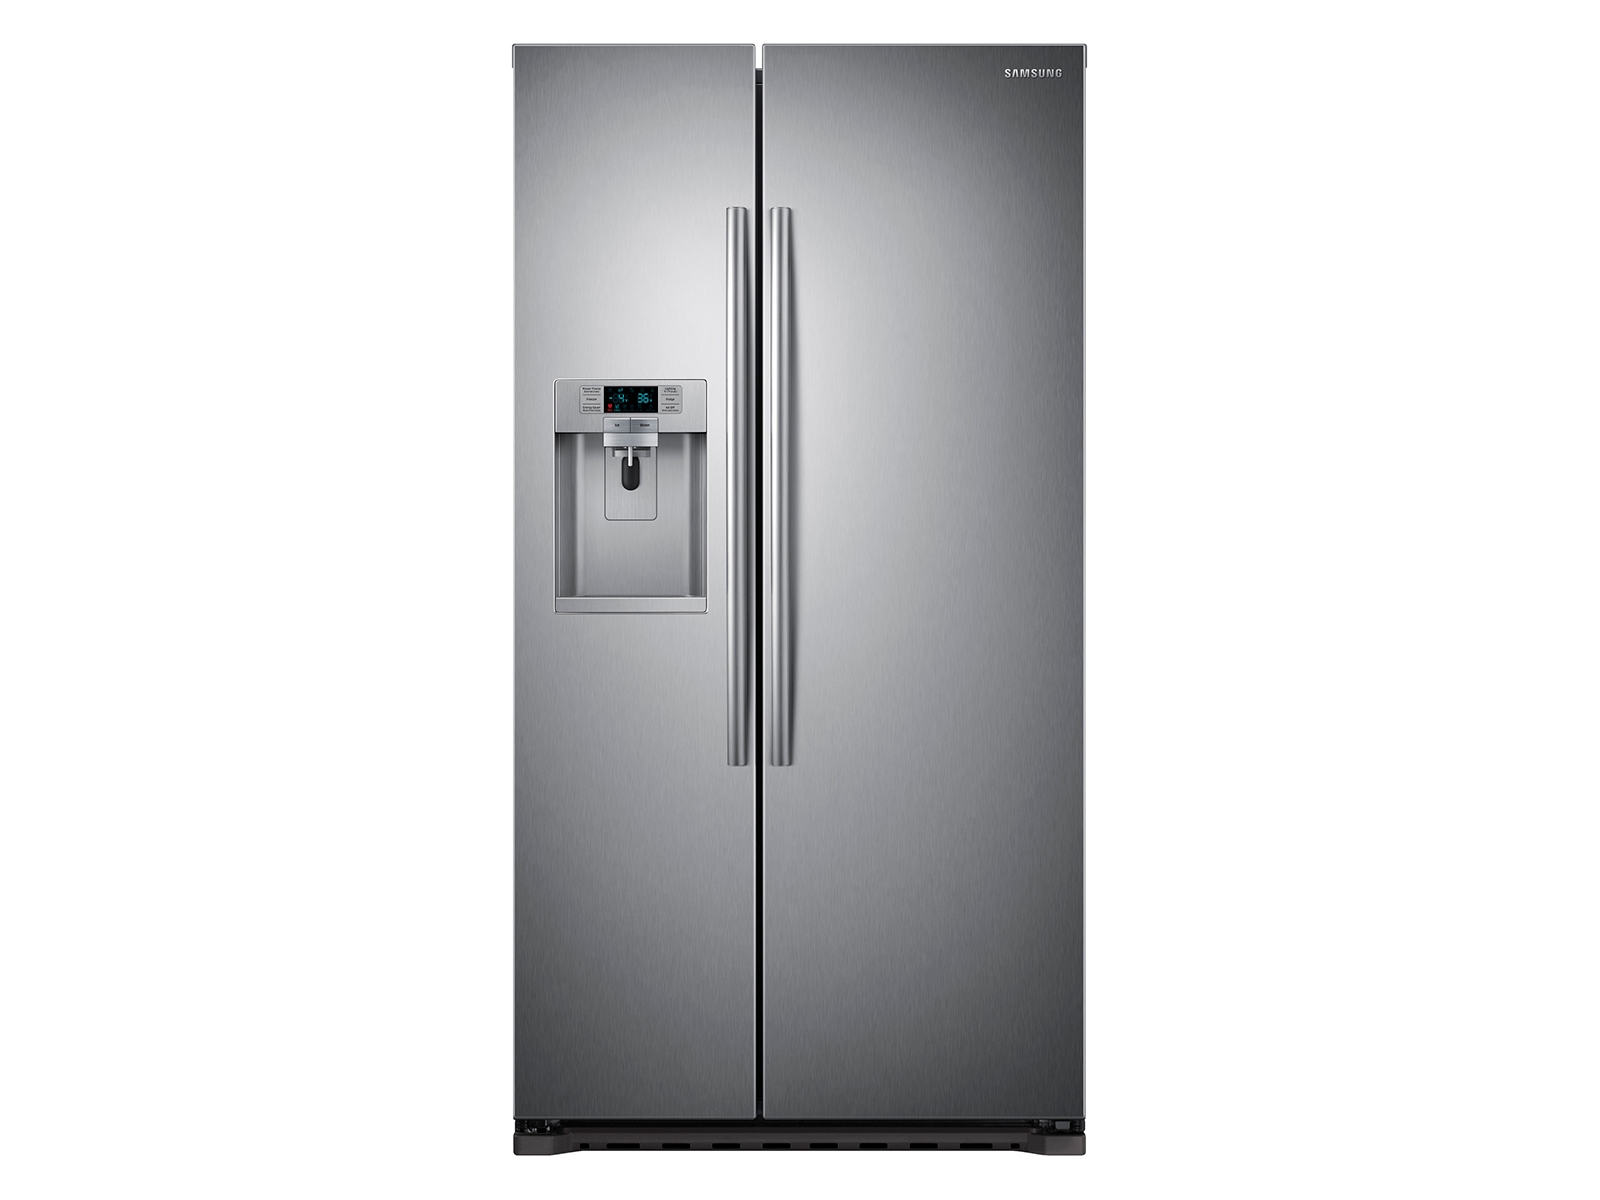 Stainless Steel 22 cu. ft. Side by Side Counter Depth Fridge | Samsung US